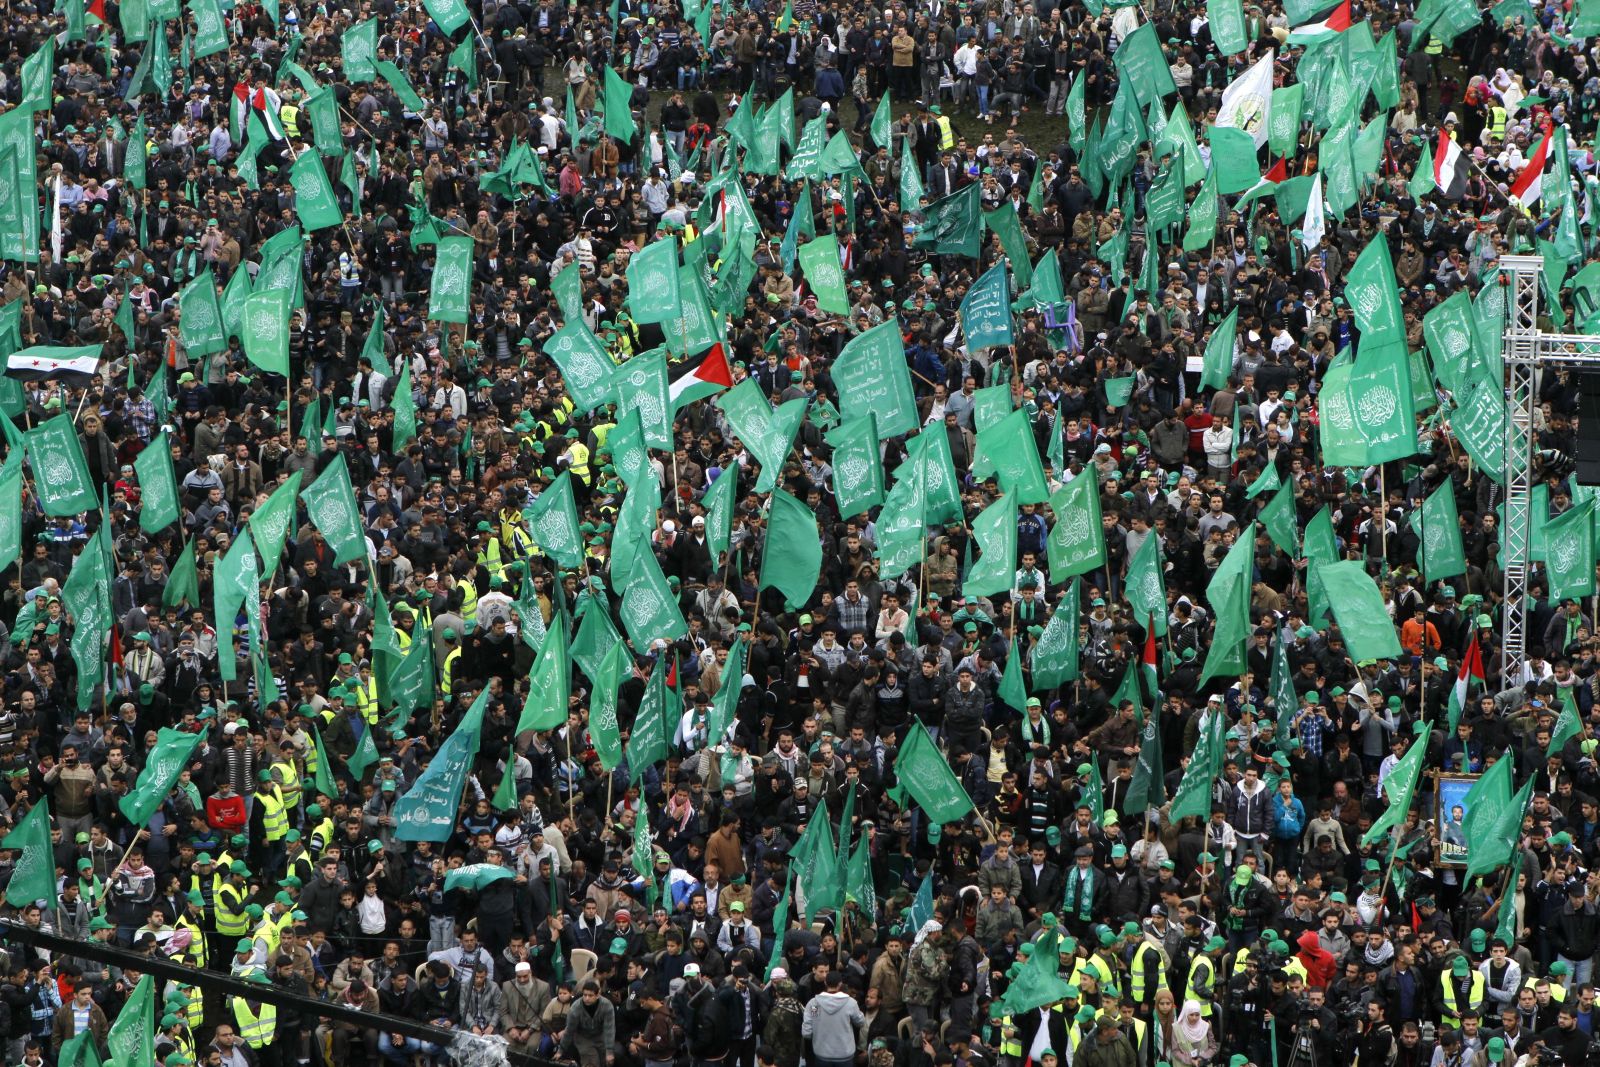 Palestinians Hamas supporters gather during a rally to commemorate the 25th anniversary of the Hamas militant group, in Gaza city, Saturday, Dec. 8, 2012. The Leader of the Islamic militant group Hamas vowed to continue fighting Israel Saturday as hundreds of thousands of flag-waving Gazans turned out for a mass rally to celebrate the 25th anniversary of the Hamas militant group, which has seen its clout and regional acceptance soar since last month's eight-day conflict with Israel. (AP Photo/Hatem Moussa)